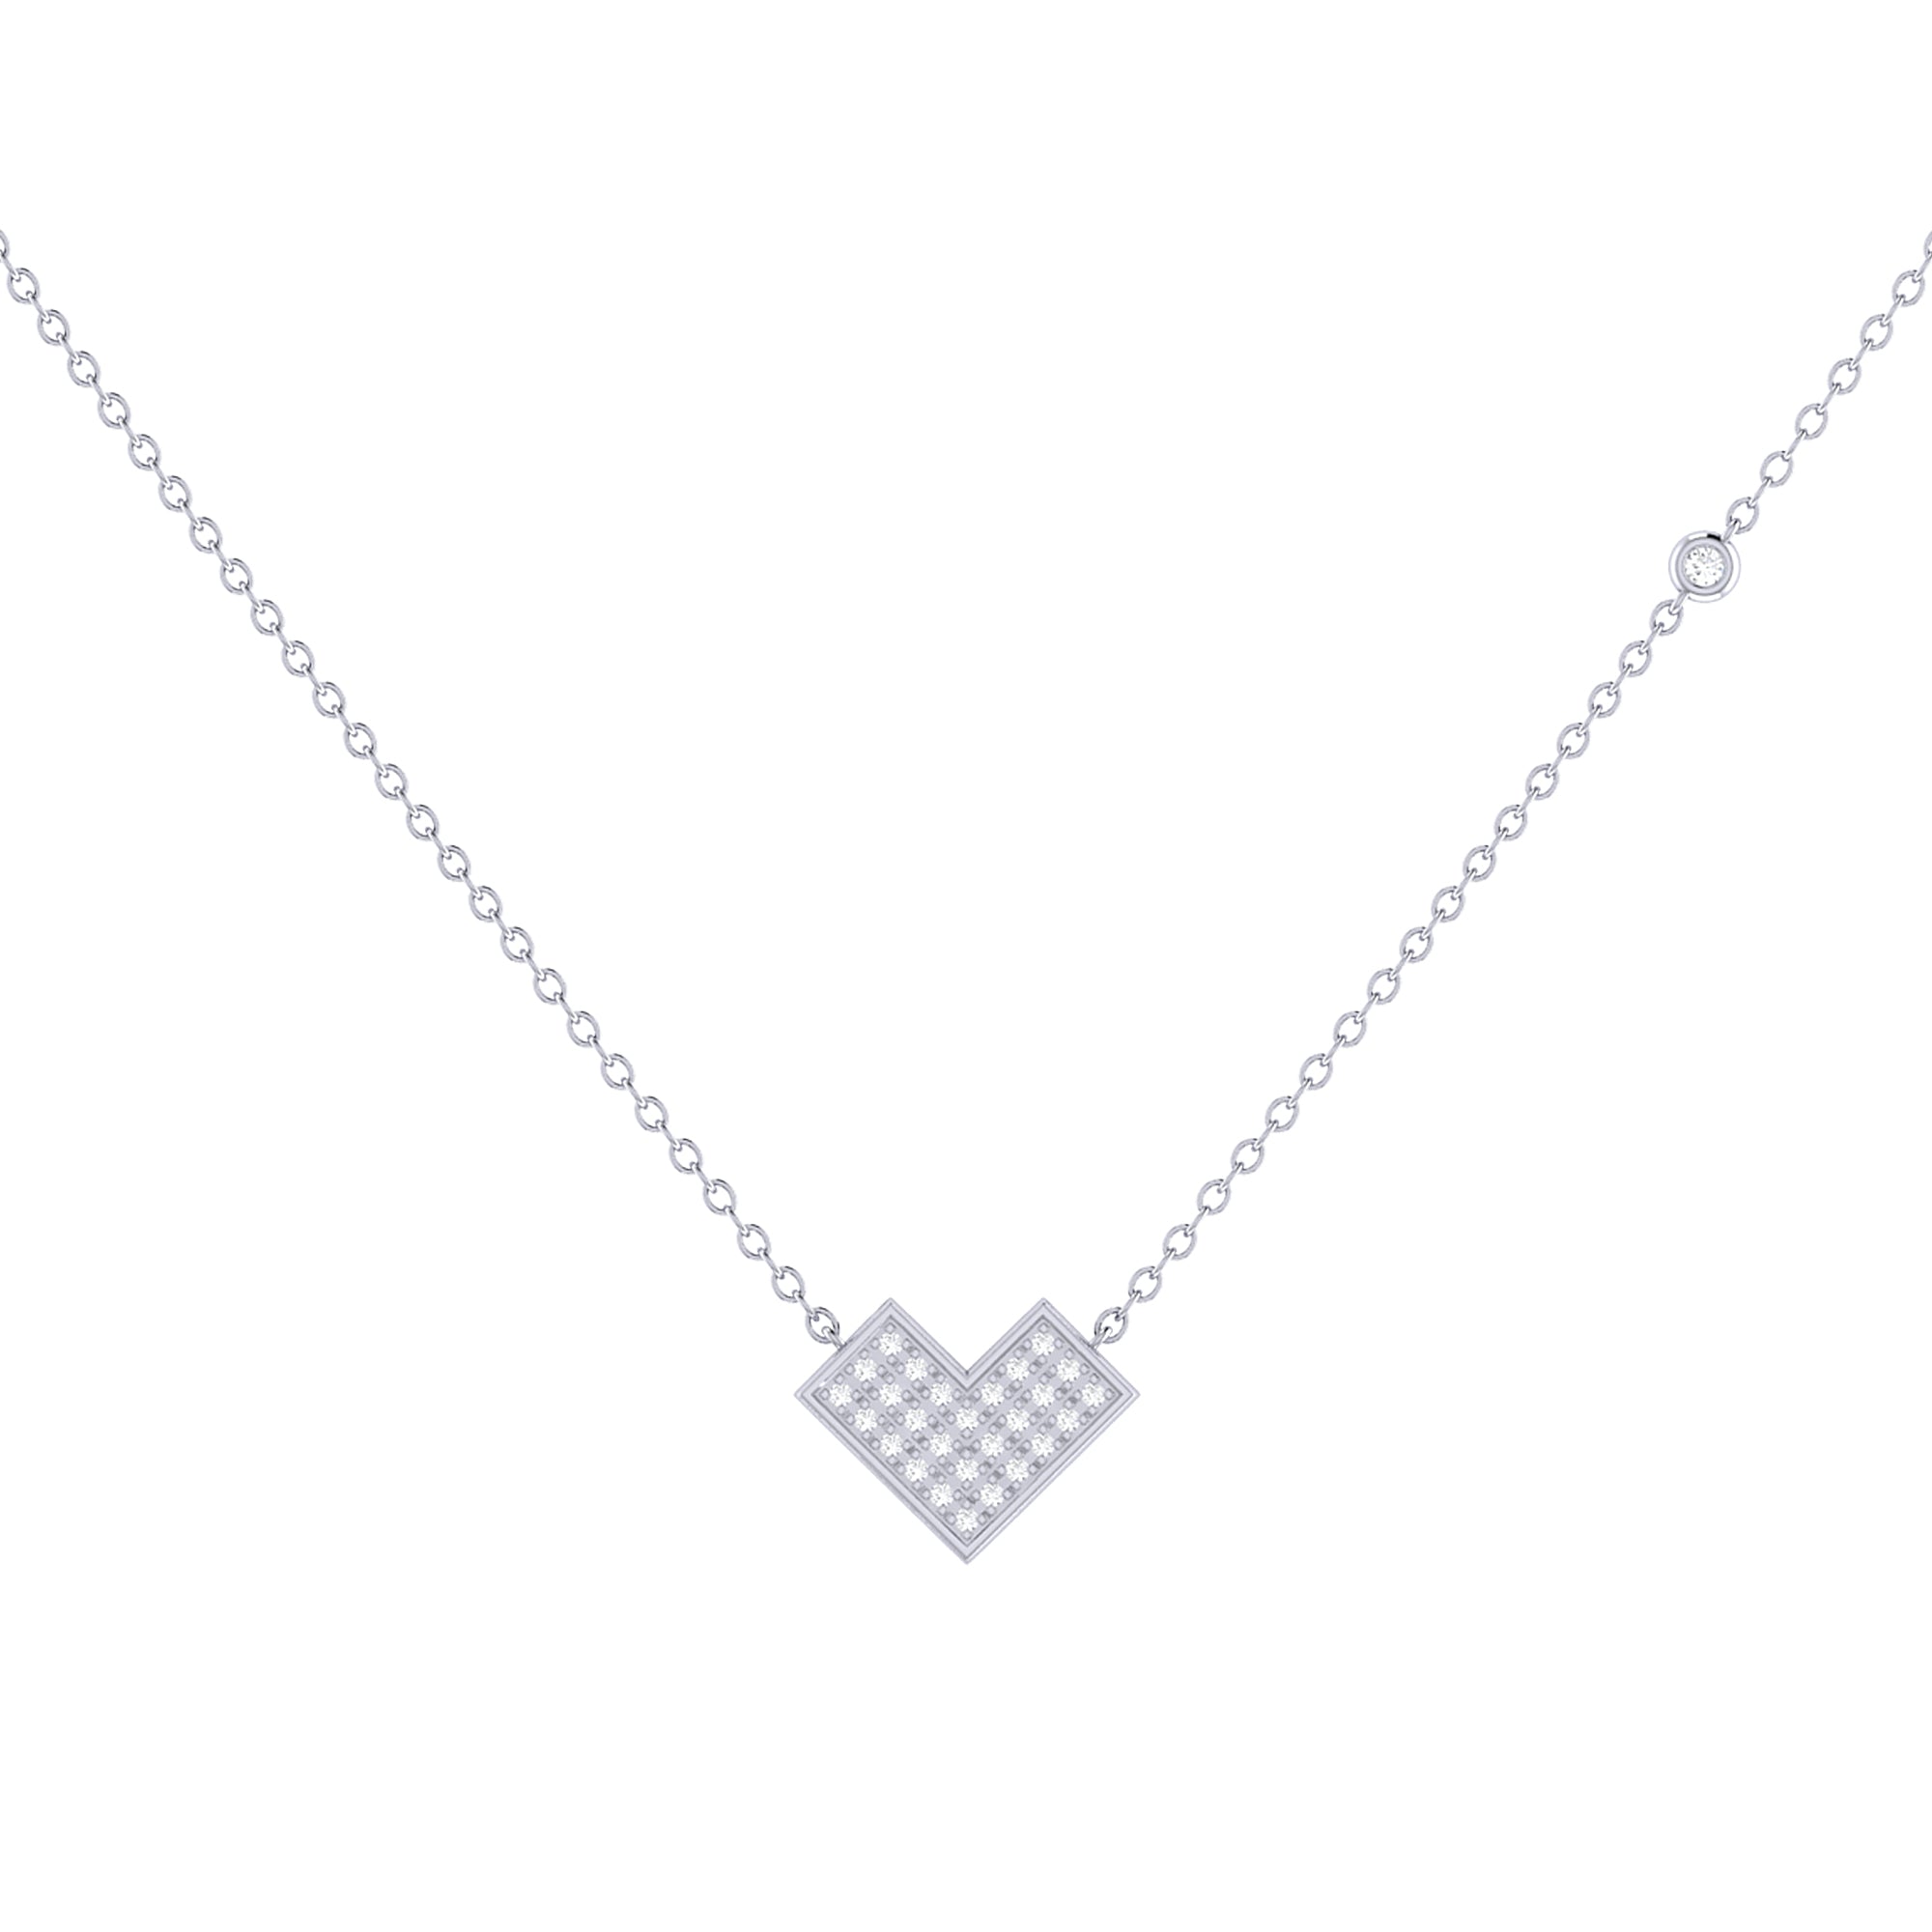 One Way Arrow Diamond Necklace in Sterling Silver